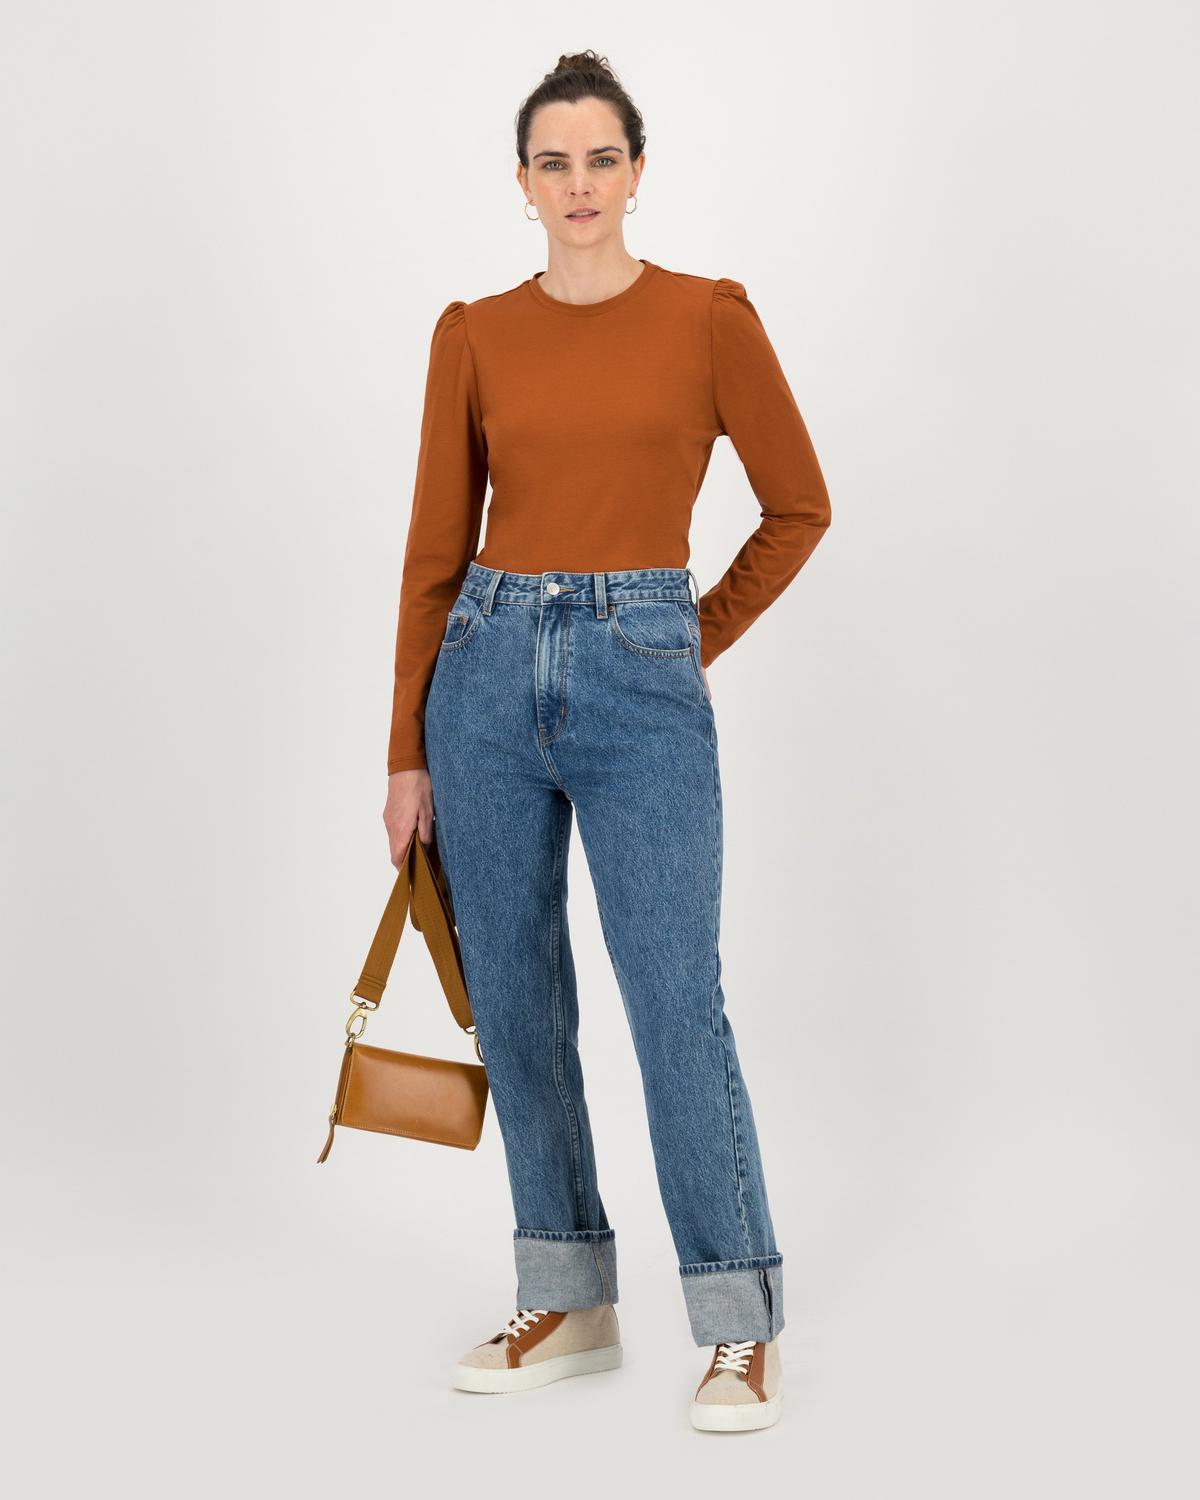 Thelma Puff Sleeve Top -  Brown